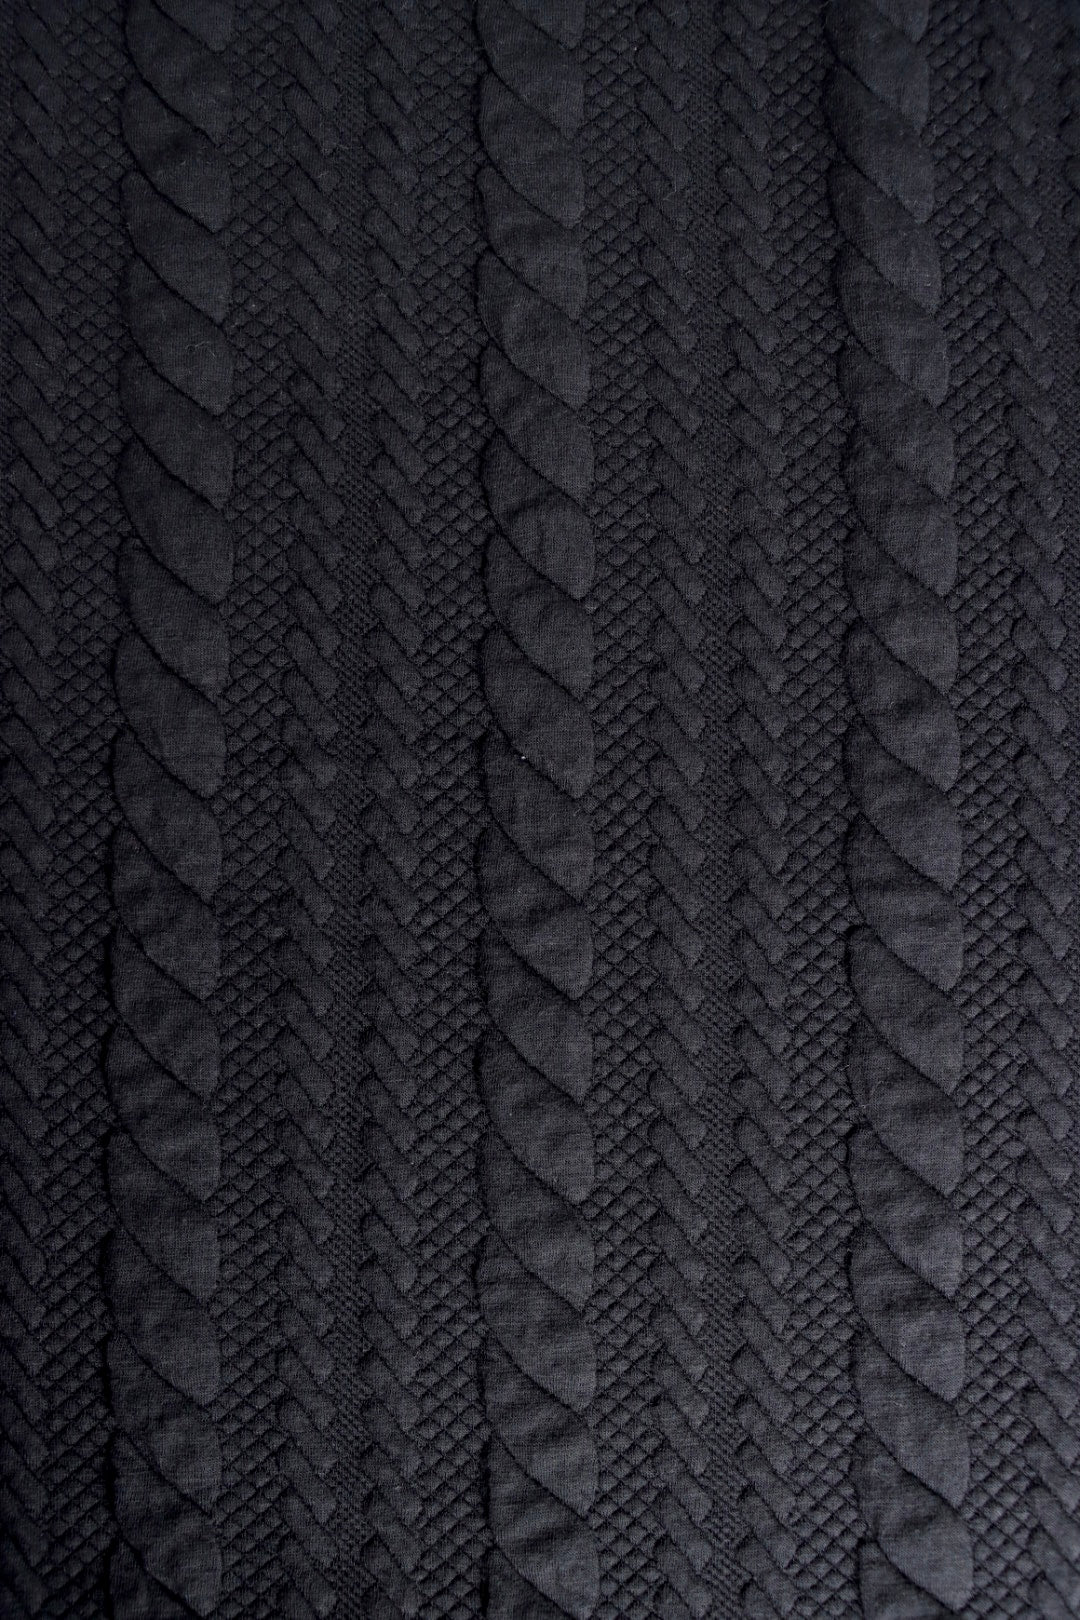 Black Cables Quilted Knit | By The Half Yard | Surge Fabric Shop